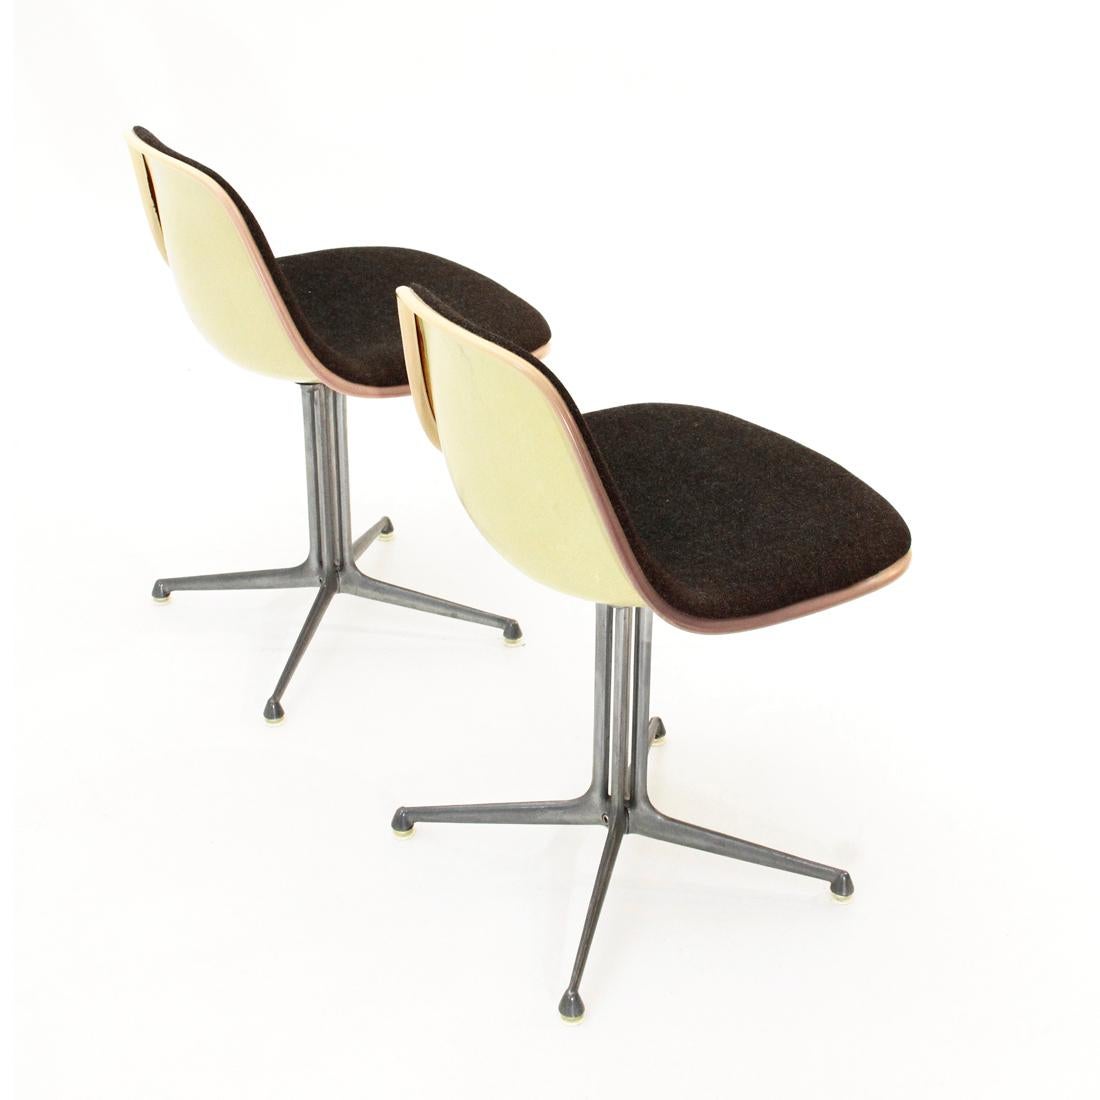 American Pair of 'La Fonda' Chairs by Charles & Ray Eames for Herman Miller, 1960s